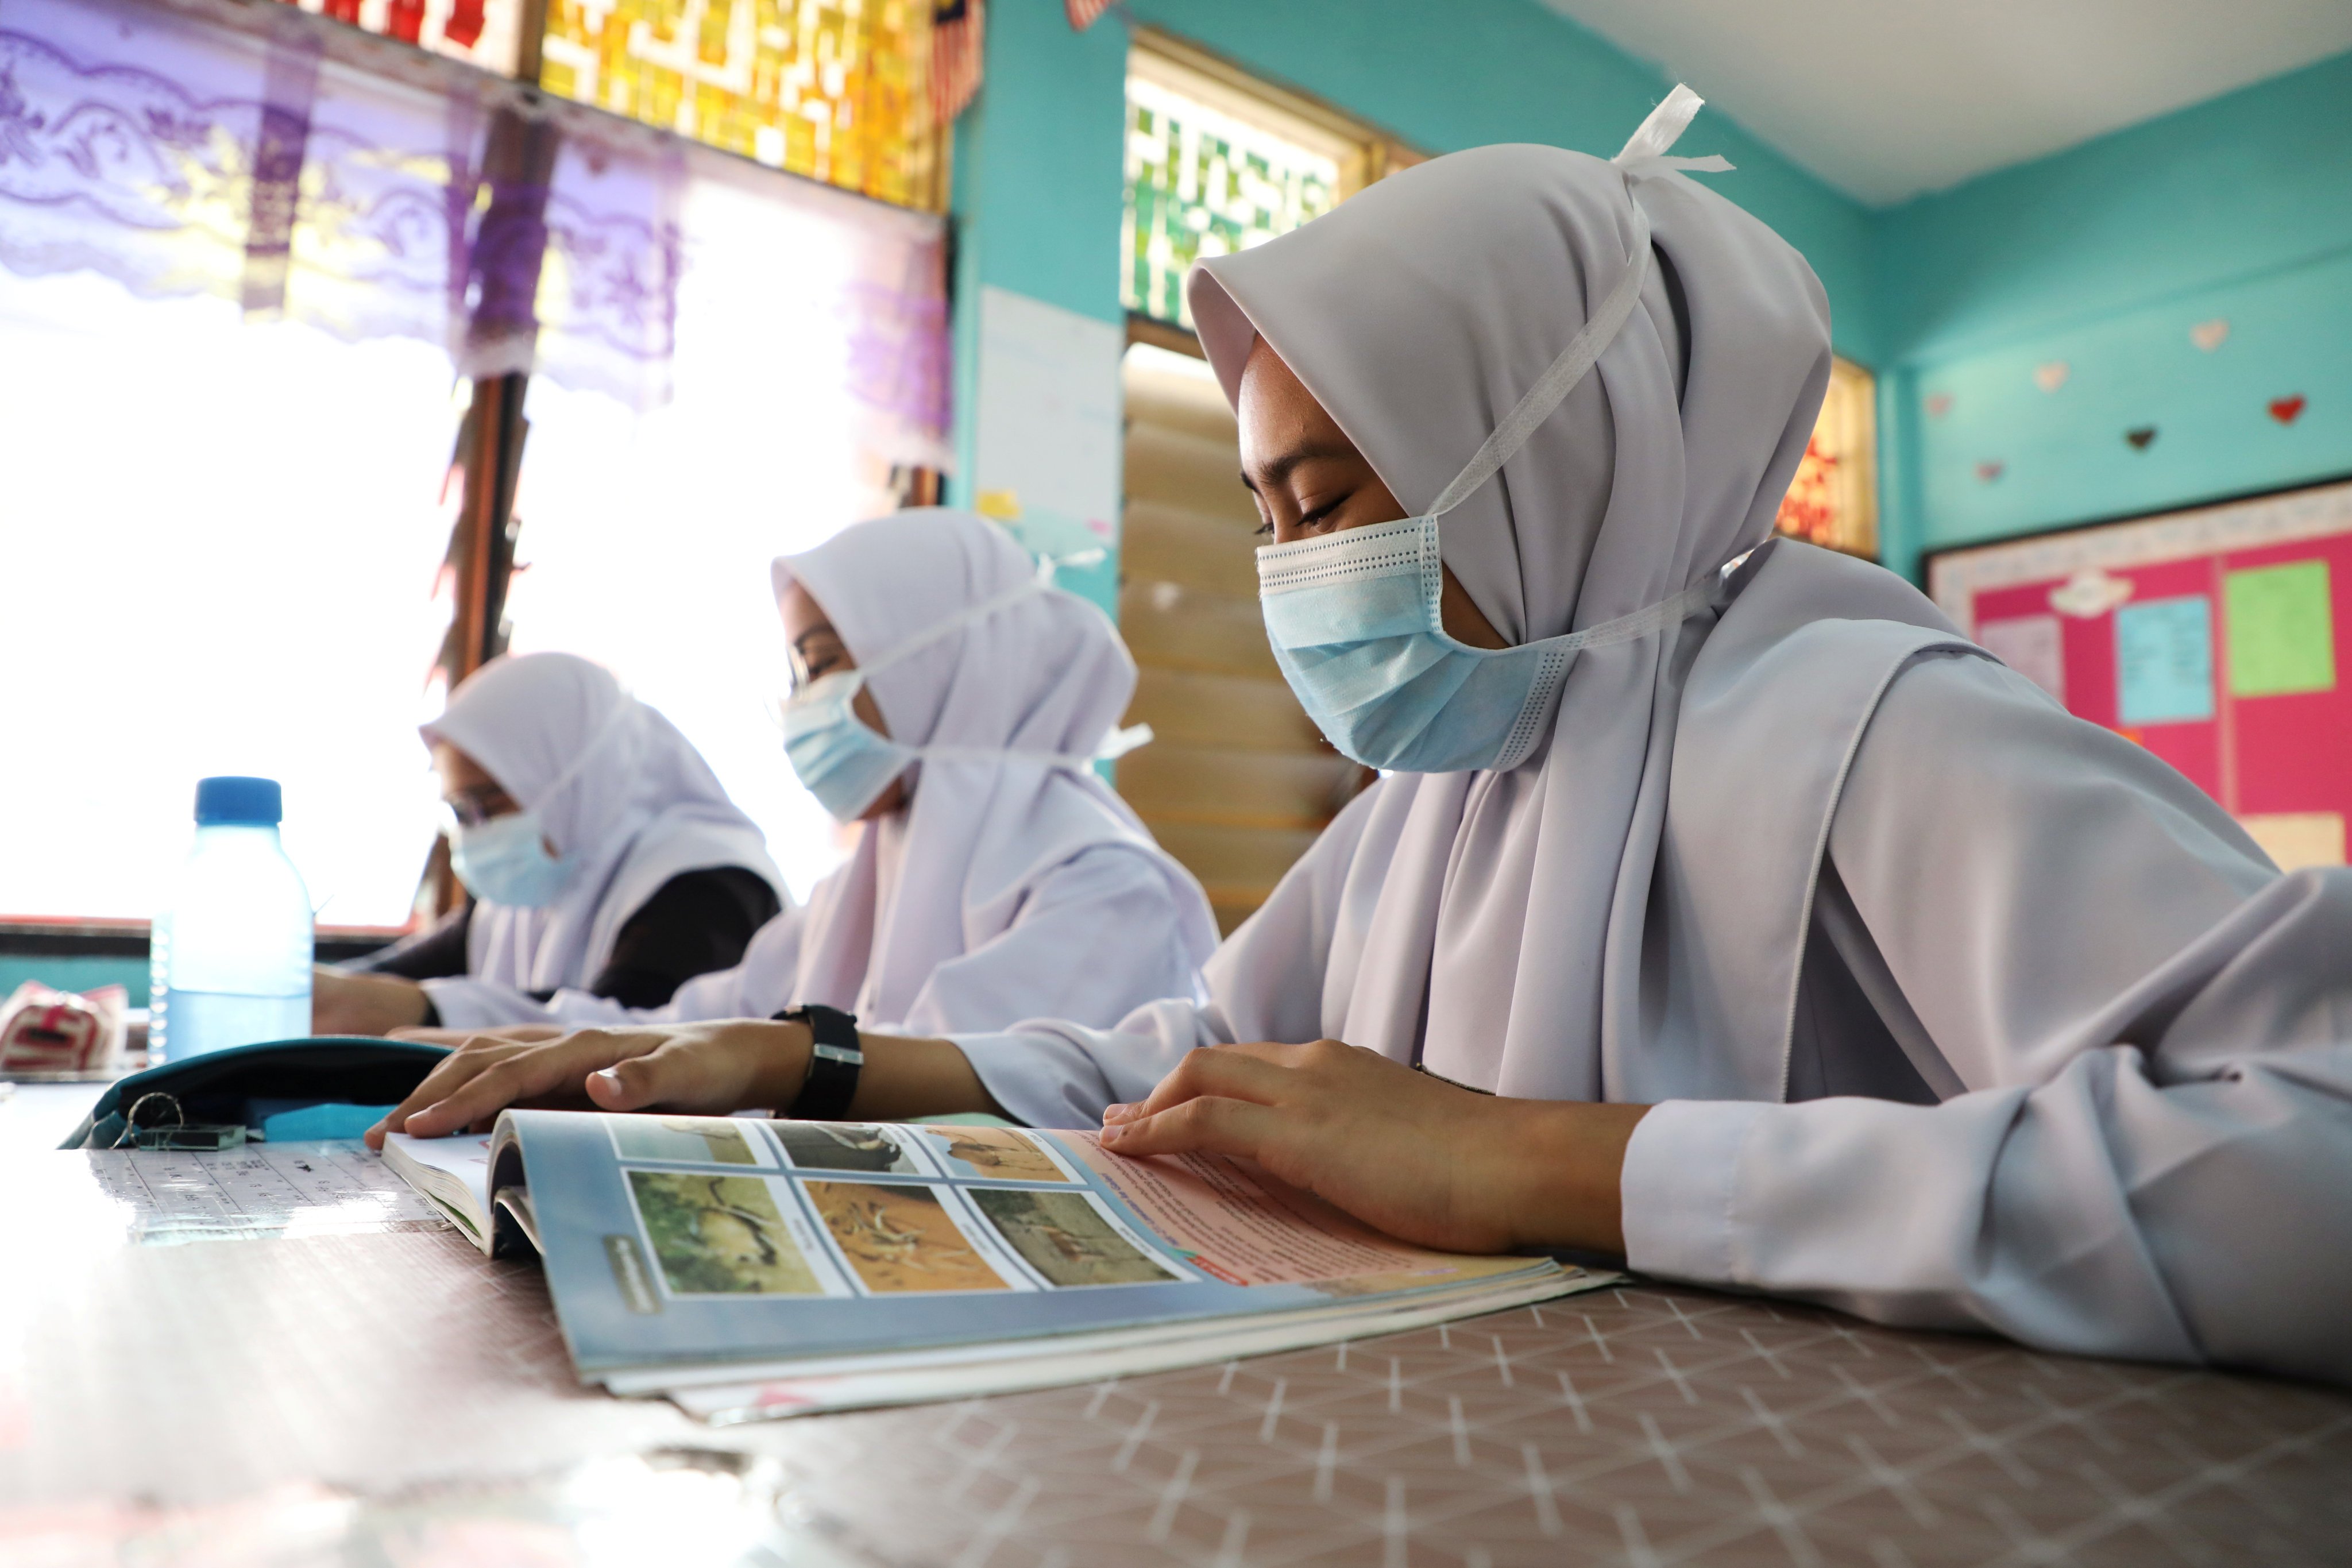 Malaysian students may have to mask up in school again as Covid case rise. Photo: Reuters